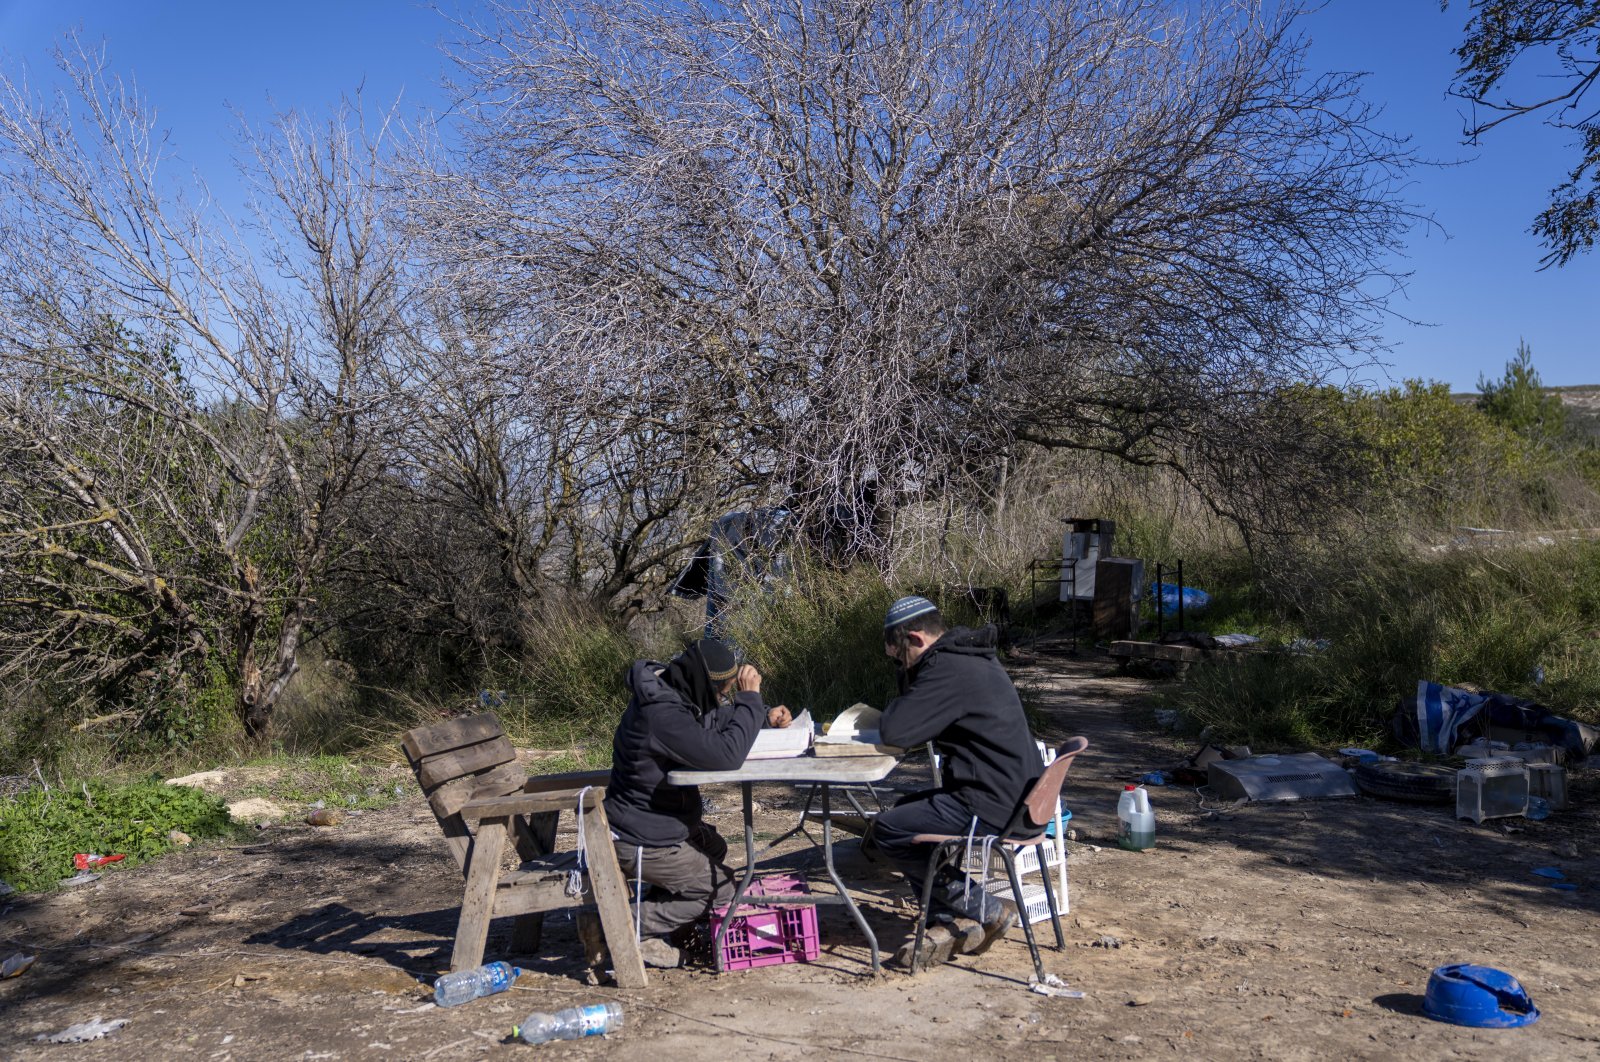 Jewish settlers study Torah at the West Bank outpost of Homesh, near the Palestinian village of Burqa, Jan. 17, 2022. (AP Photo)